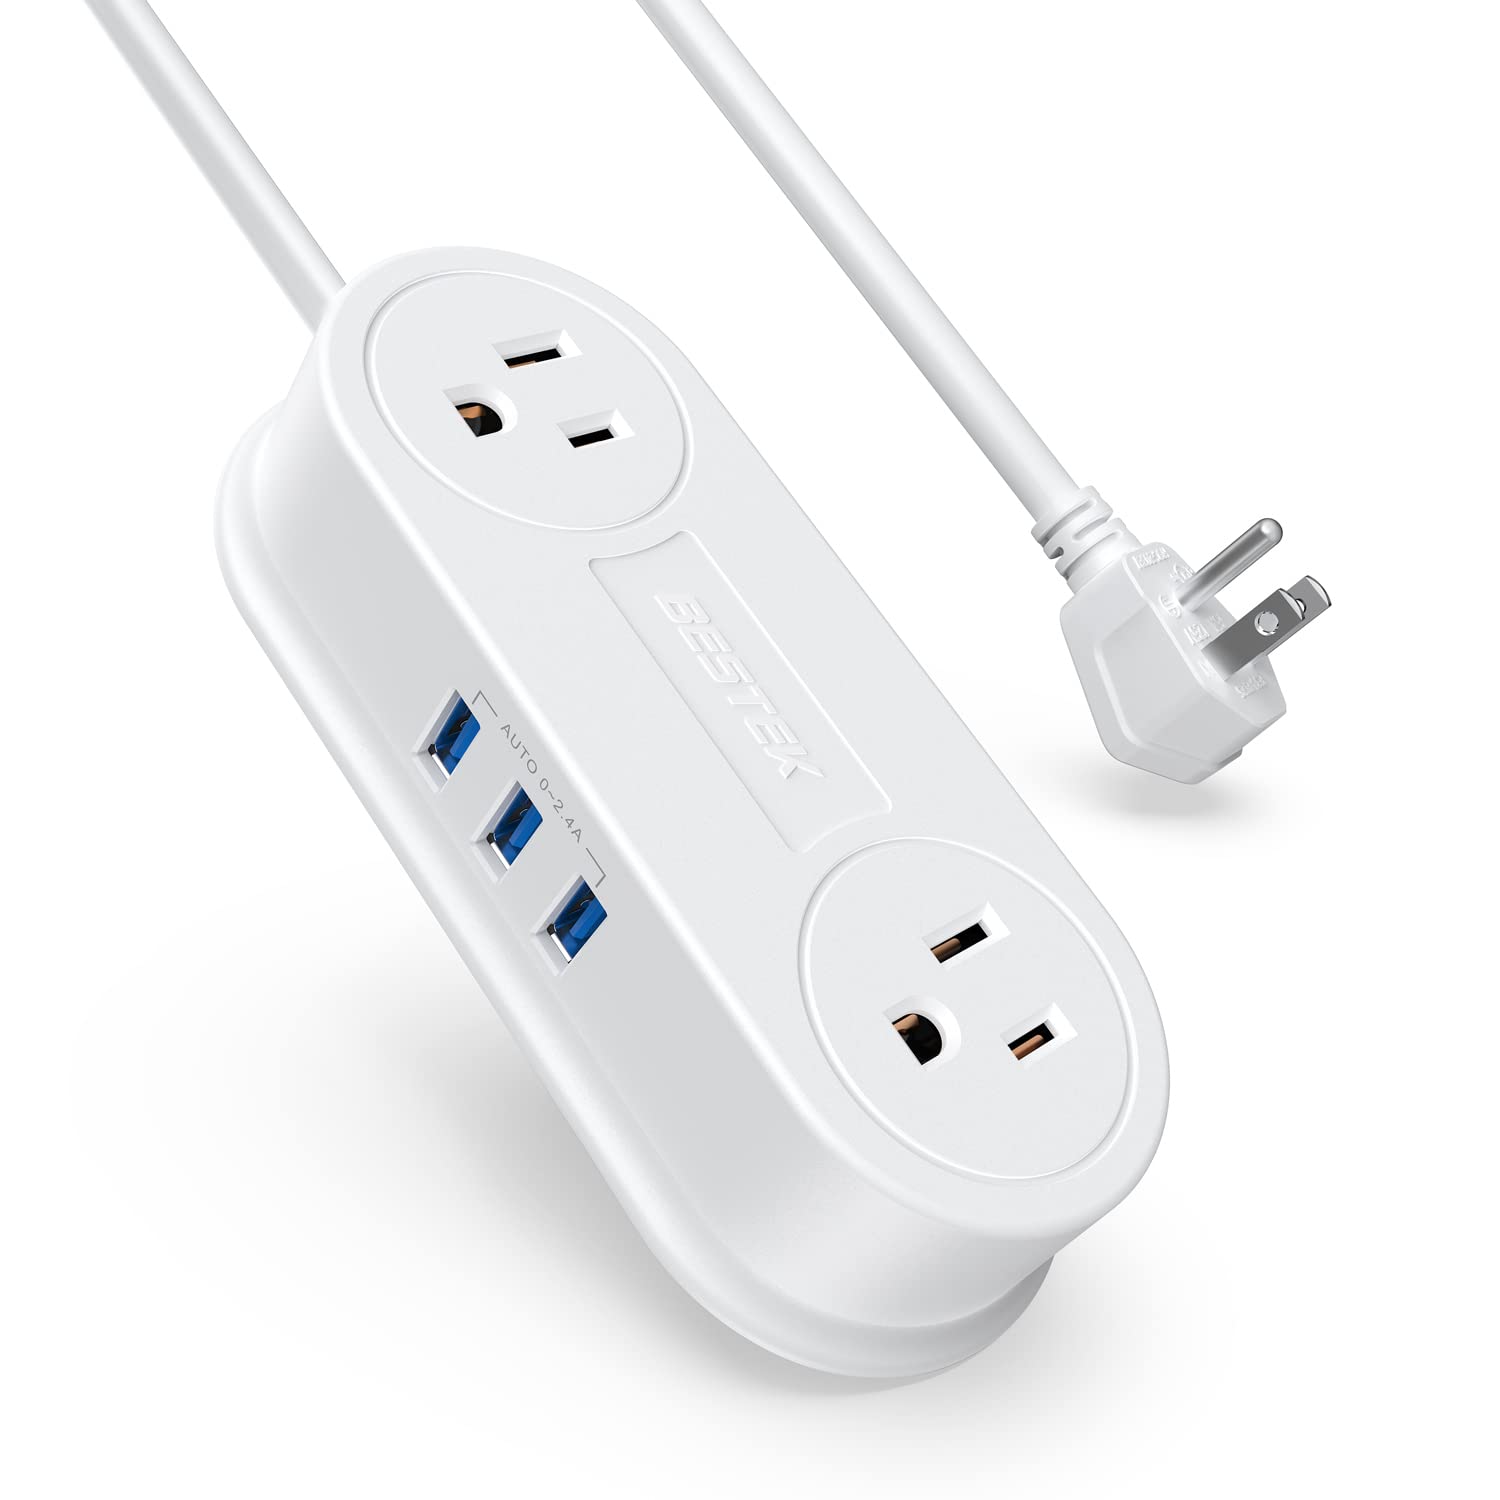 Bestek Small Travel Power Strip with 3 USB Ports, BESTEK 2 Outlet Portable Plug Strip charging Station with Adhesive Sticker, 5 Ft Exte